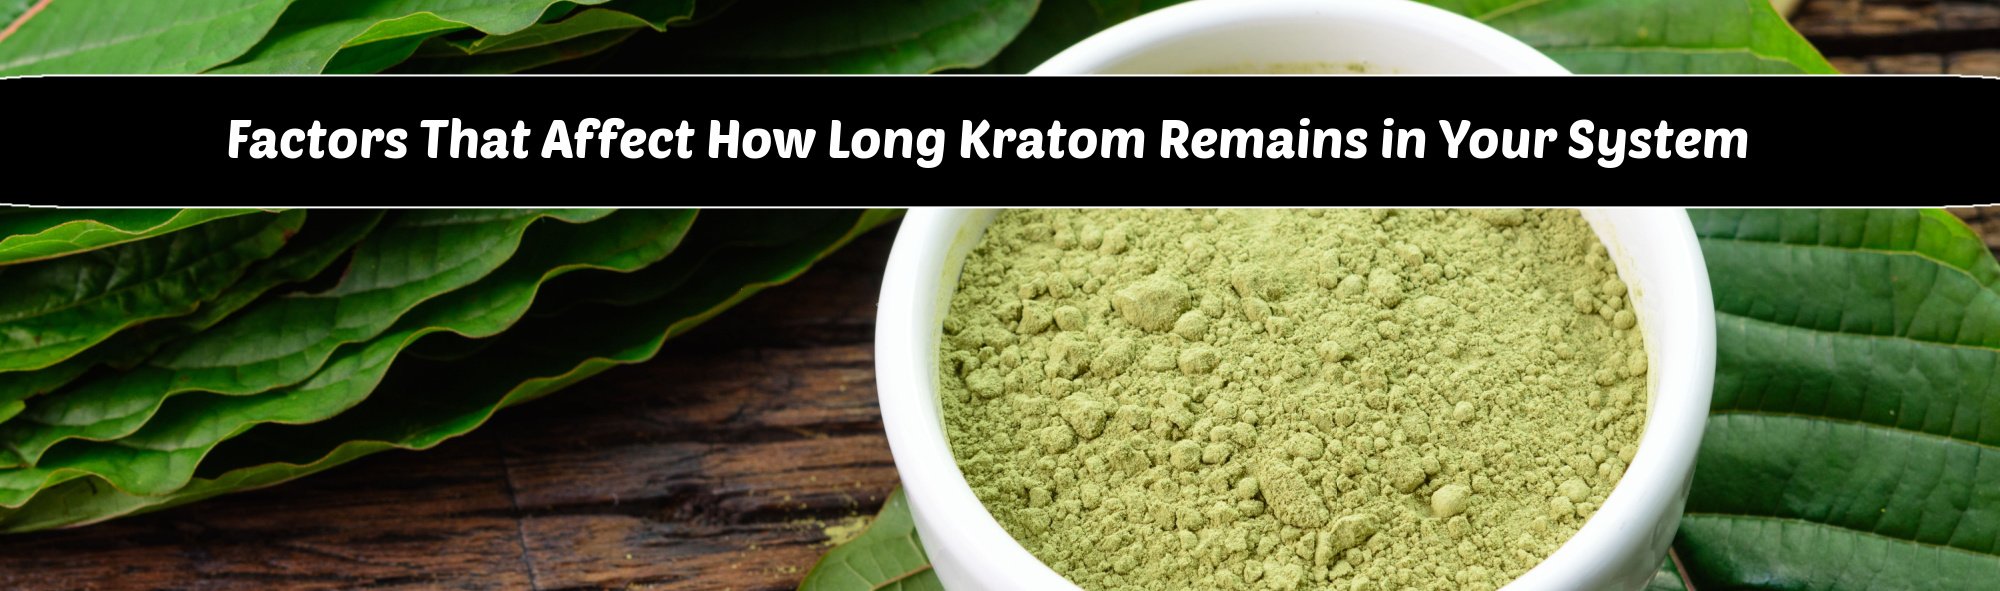 image of factors that affect how long kratom remains in your system